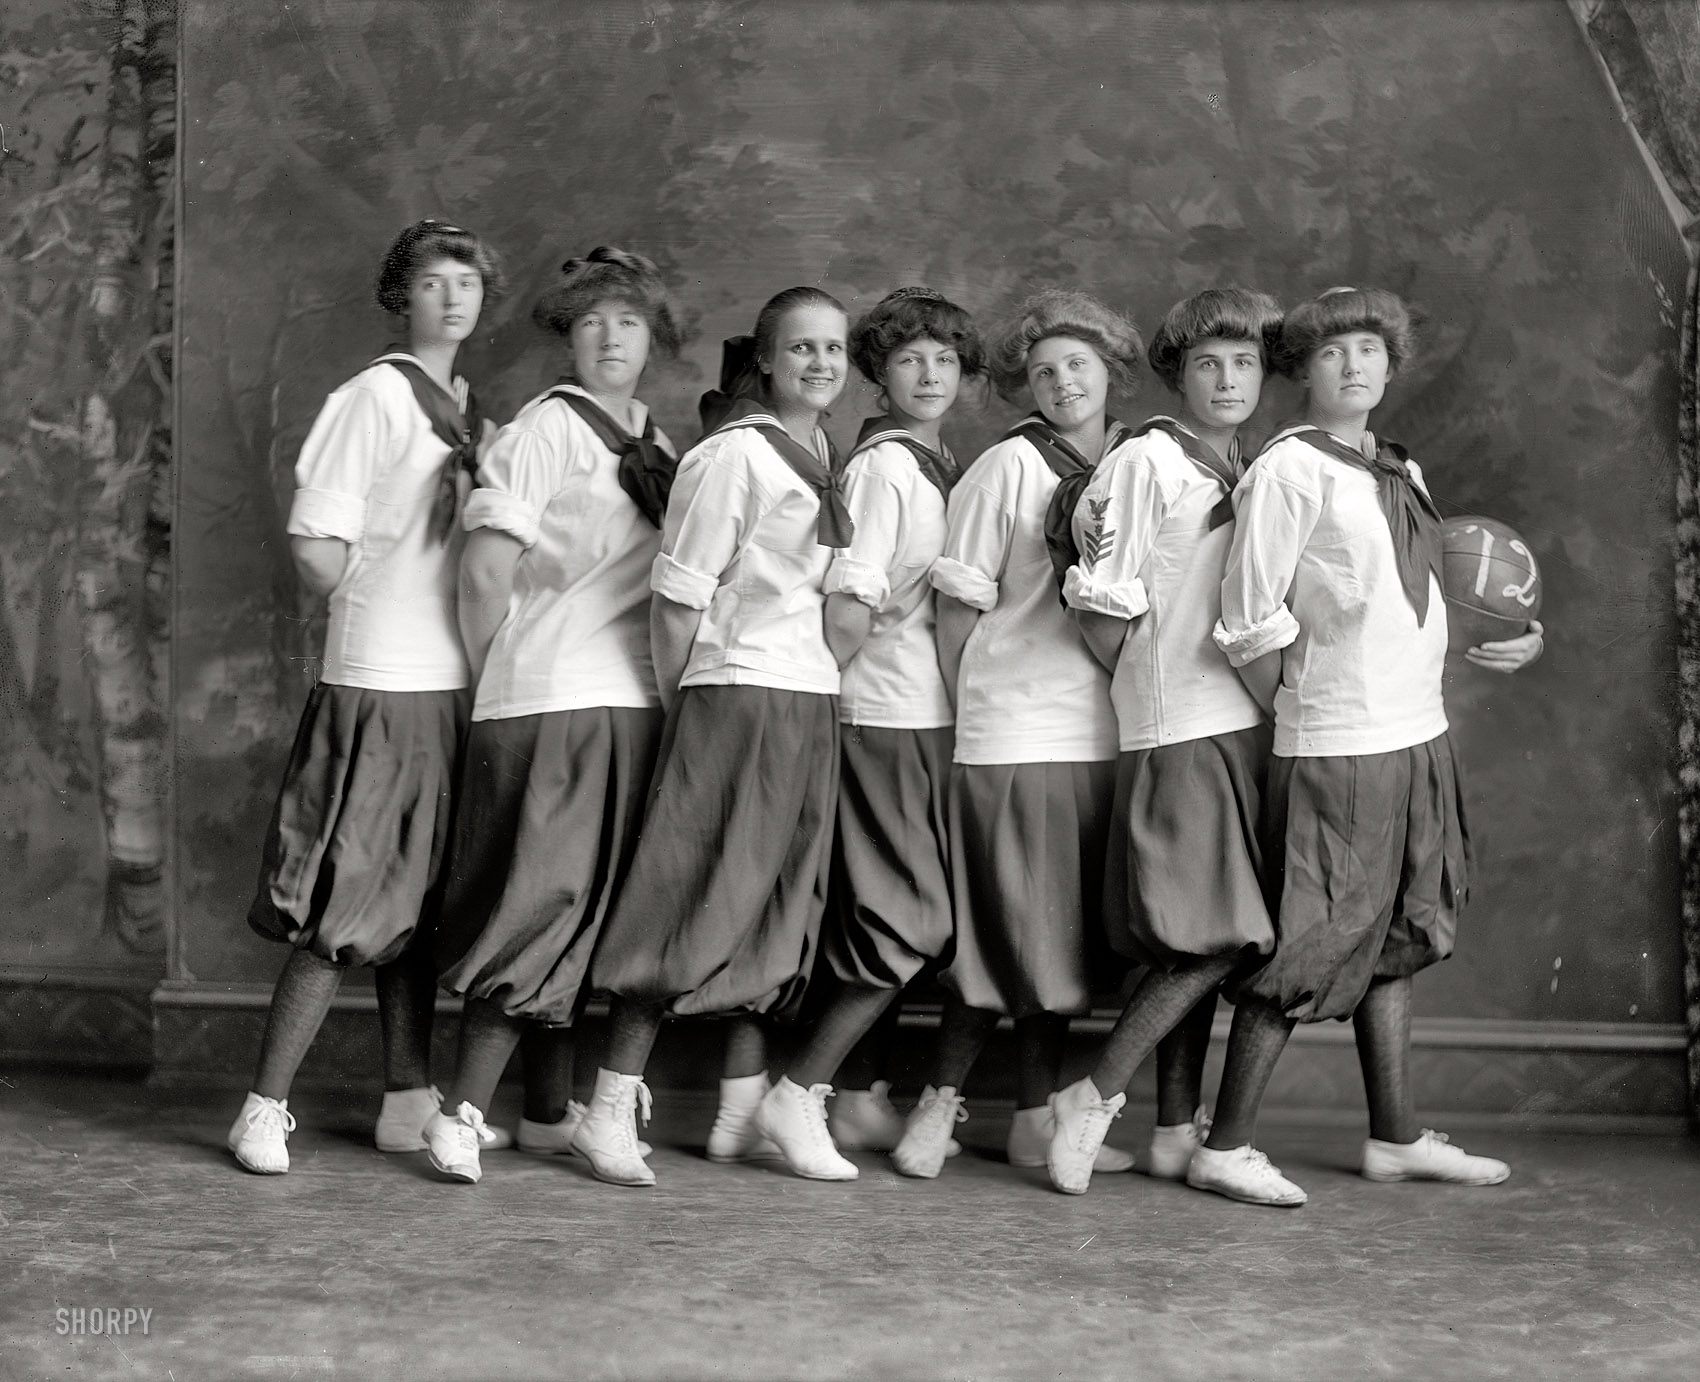 Washington, D.C. "Madeira School group." The Class of 1912 had that Gibson Girl thang goin' on. Harris & Ewing Collection glass negative. View full size.